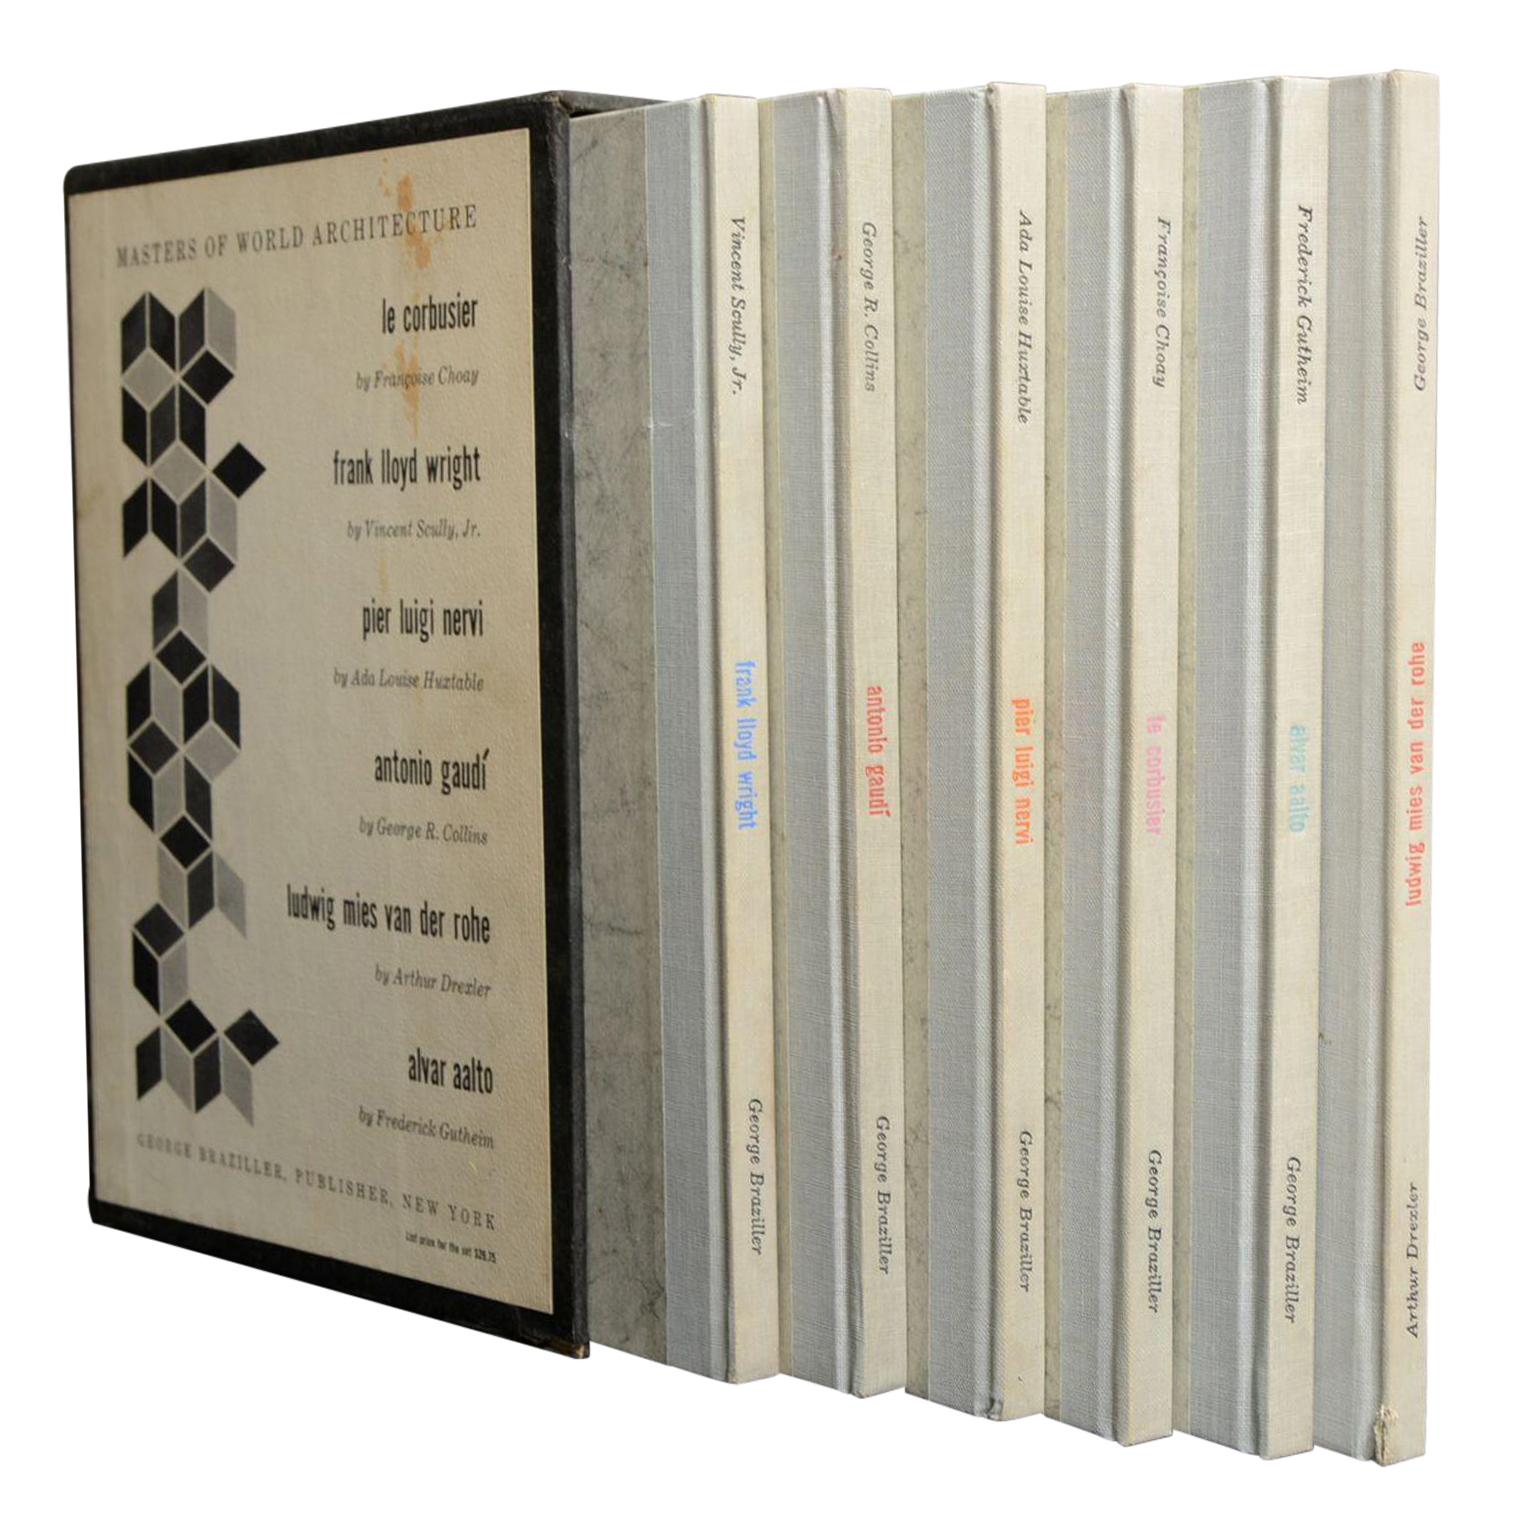 "Masters of World Architecture" Six Volume Set Book Collection, George Braziller